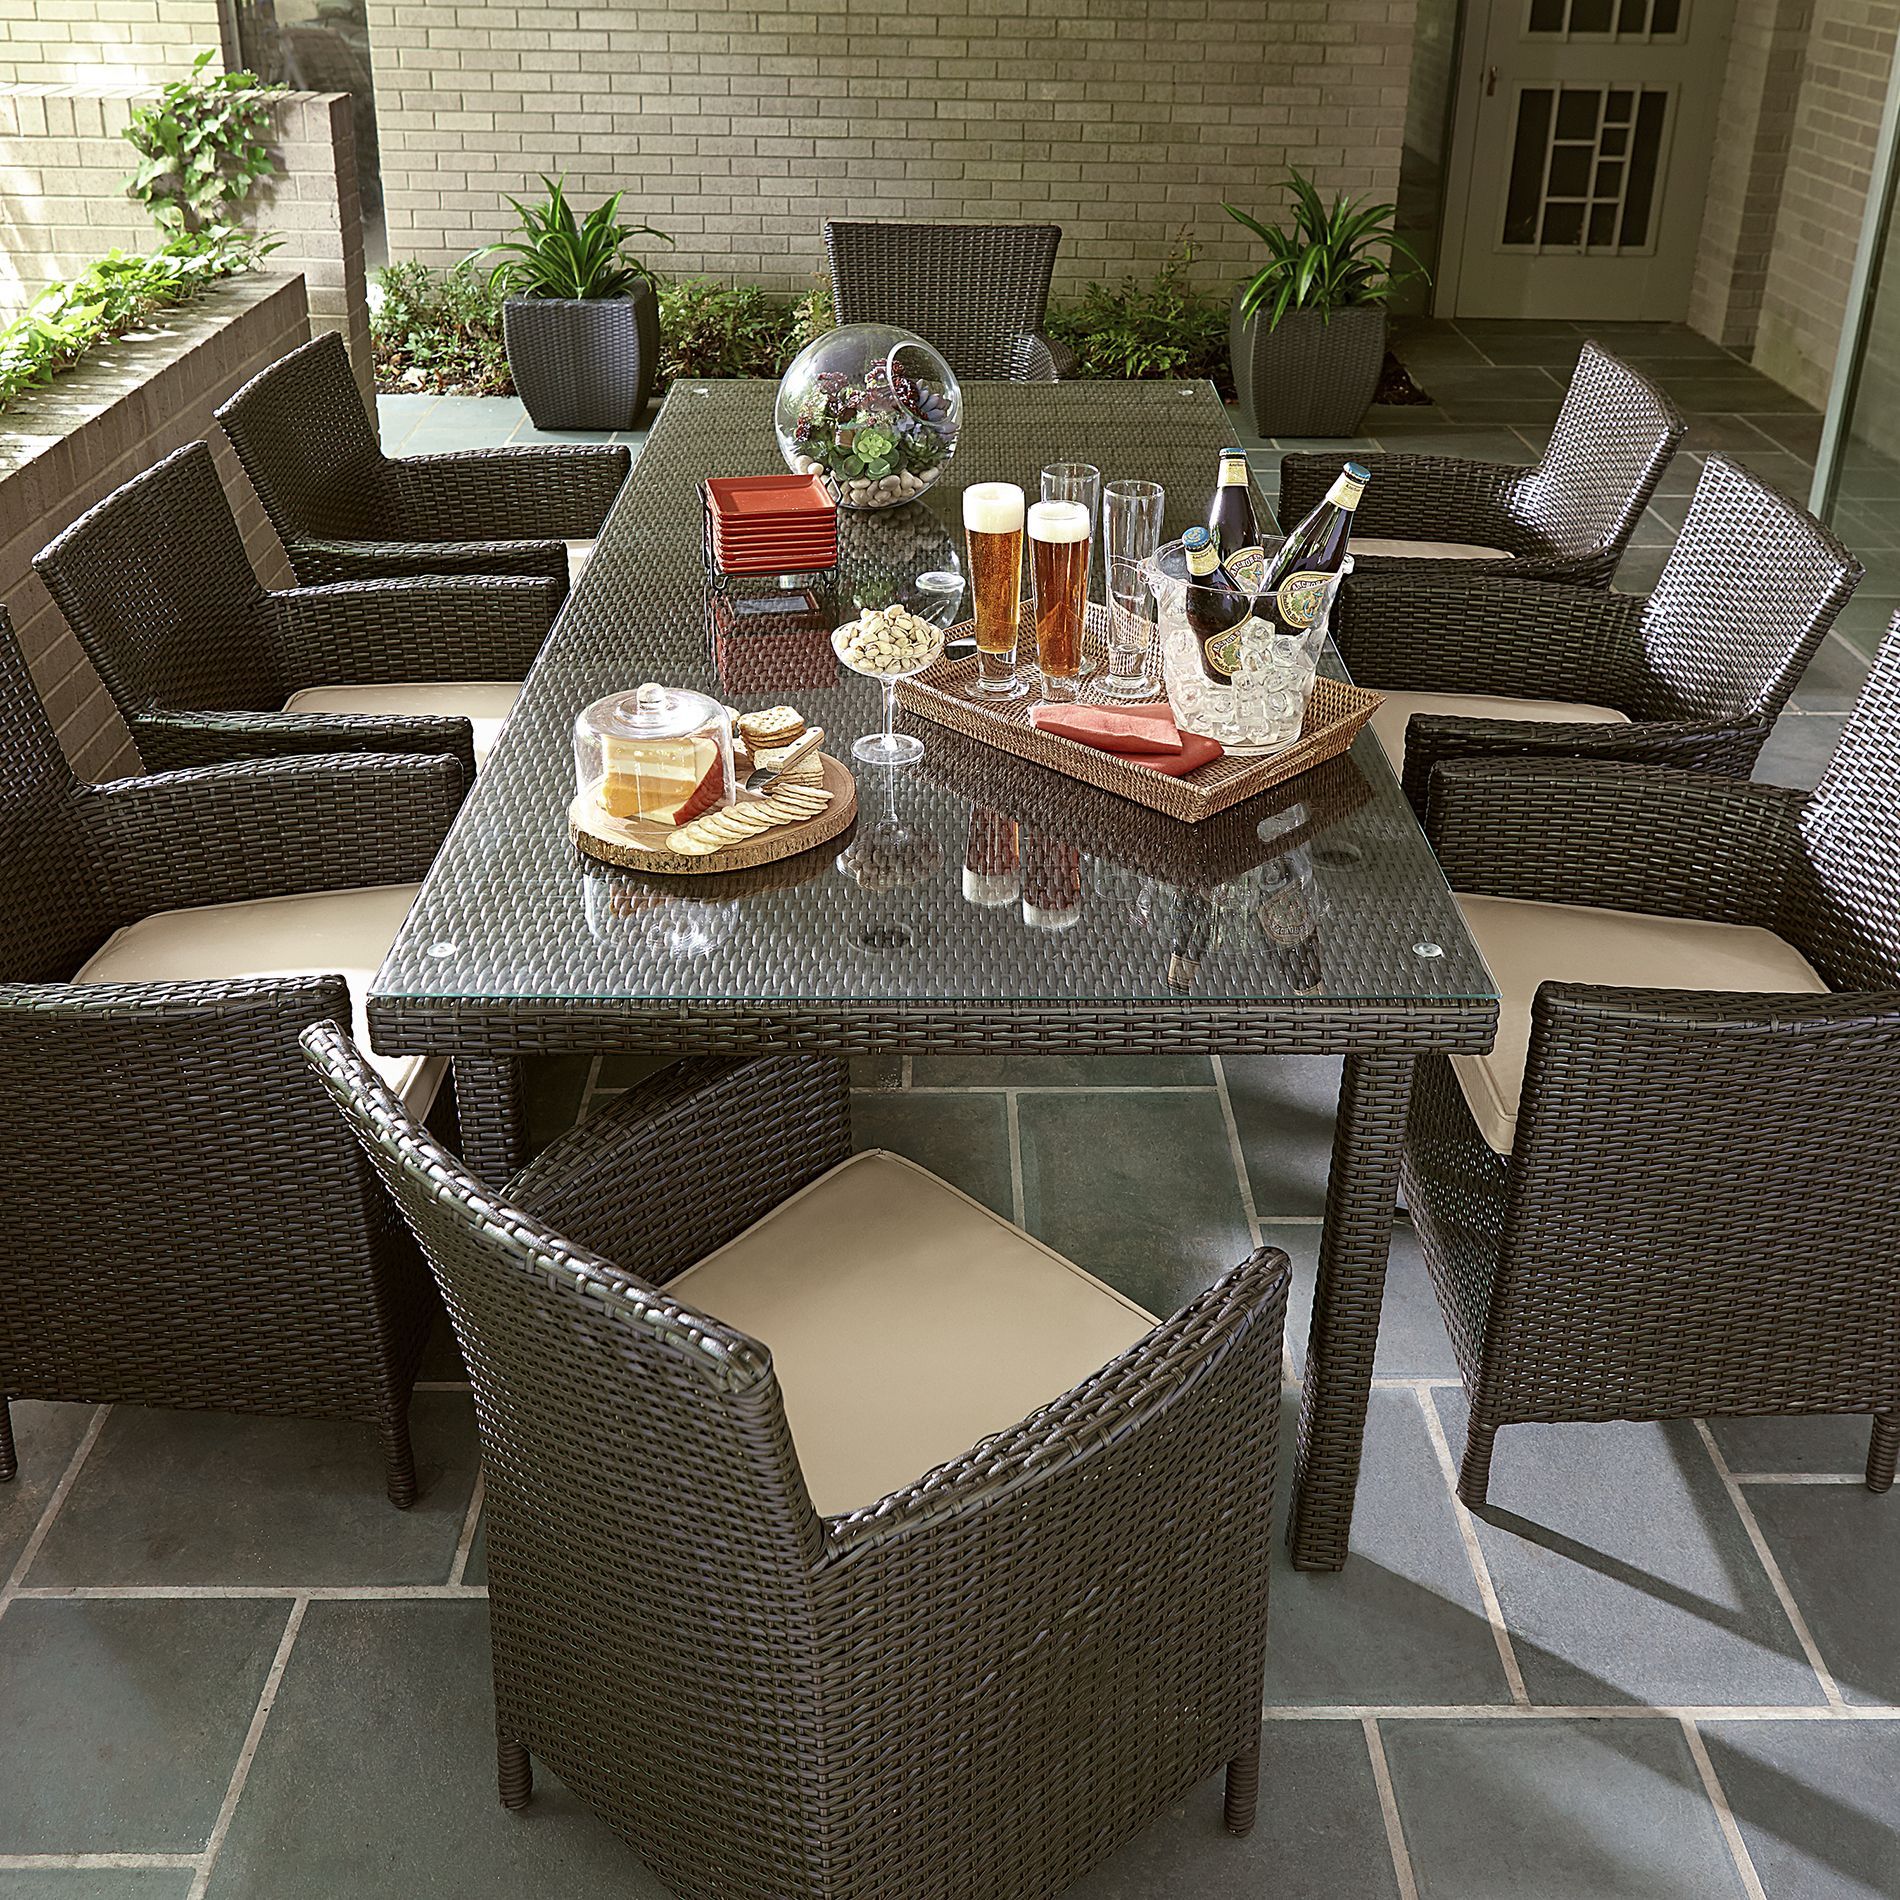 This Has A Great $999 On Sale Price | Rectangular Dining Set, Patio Within Green Outdoor Seating Patio Sets (View 8 of 15)